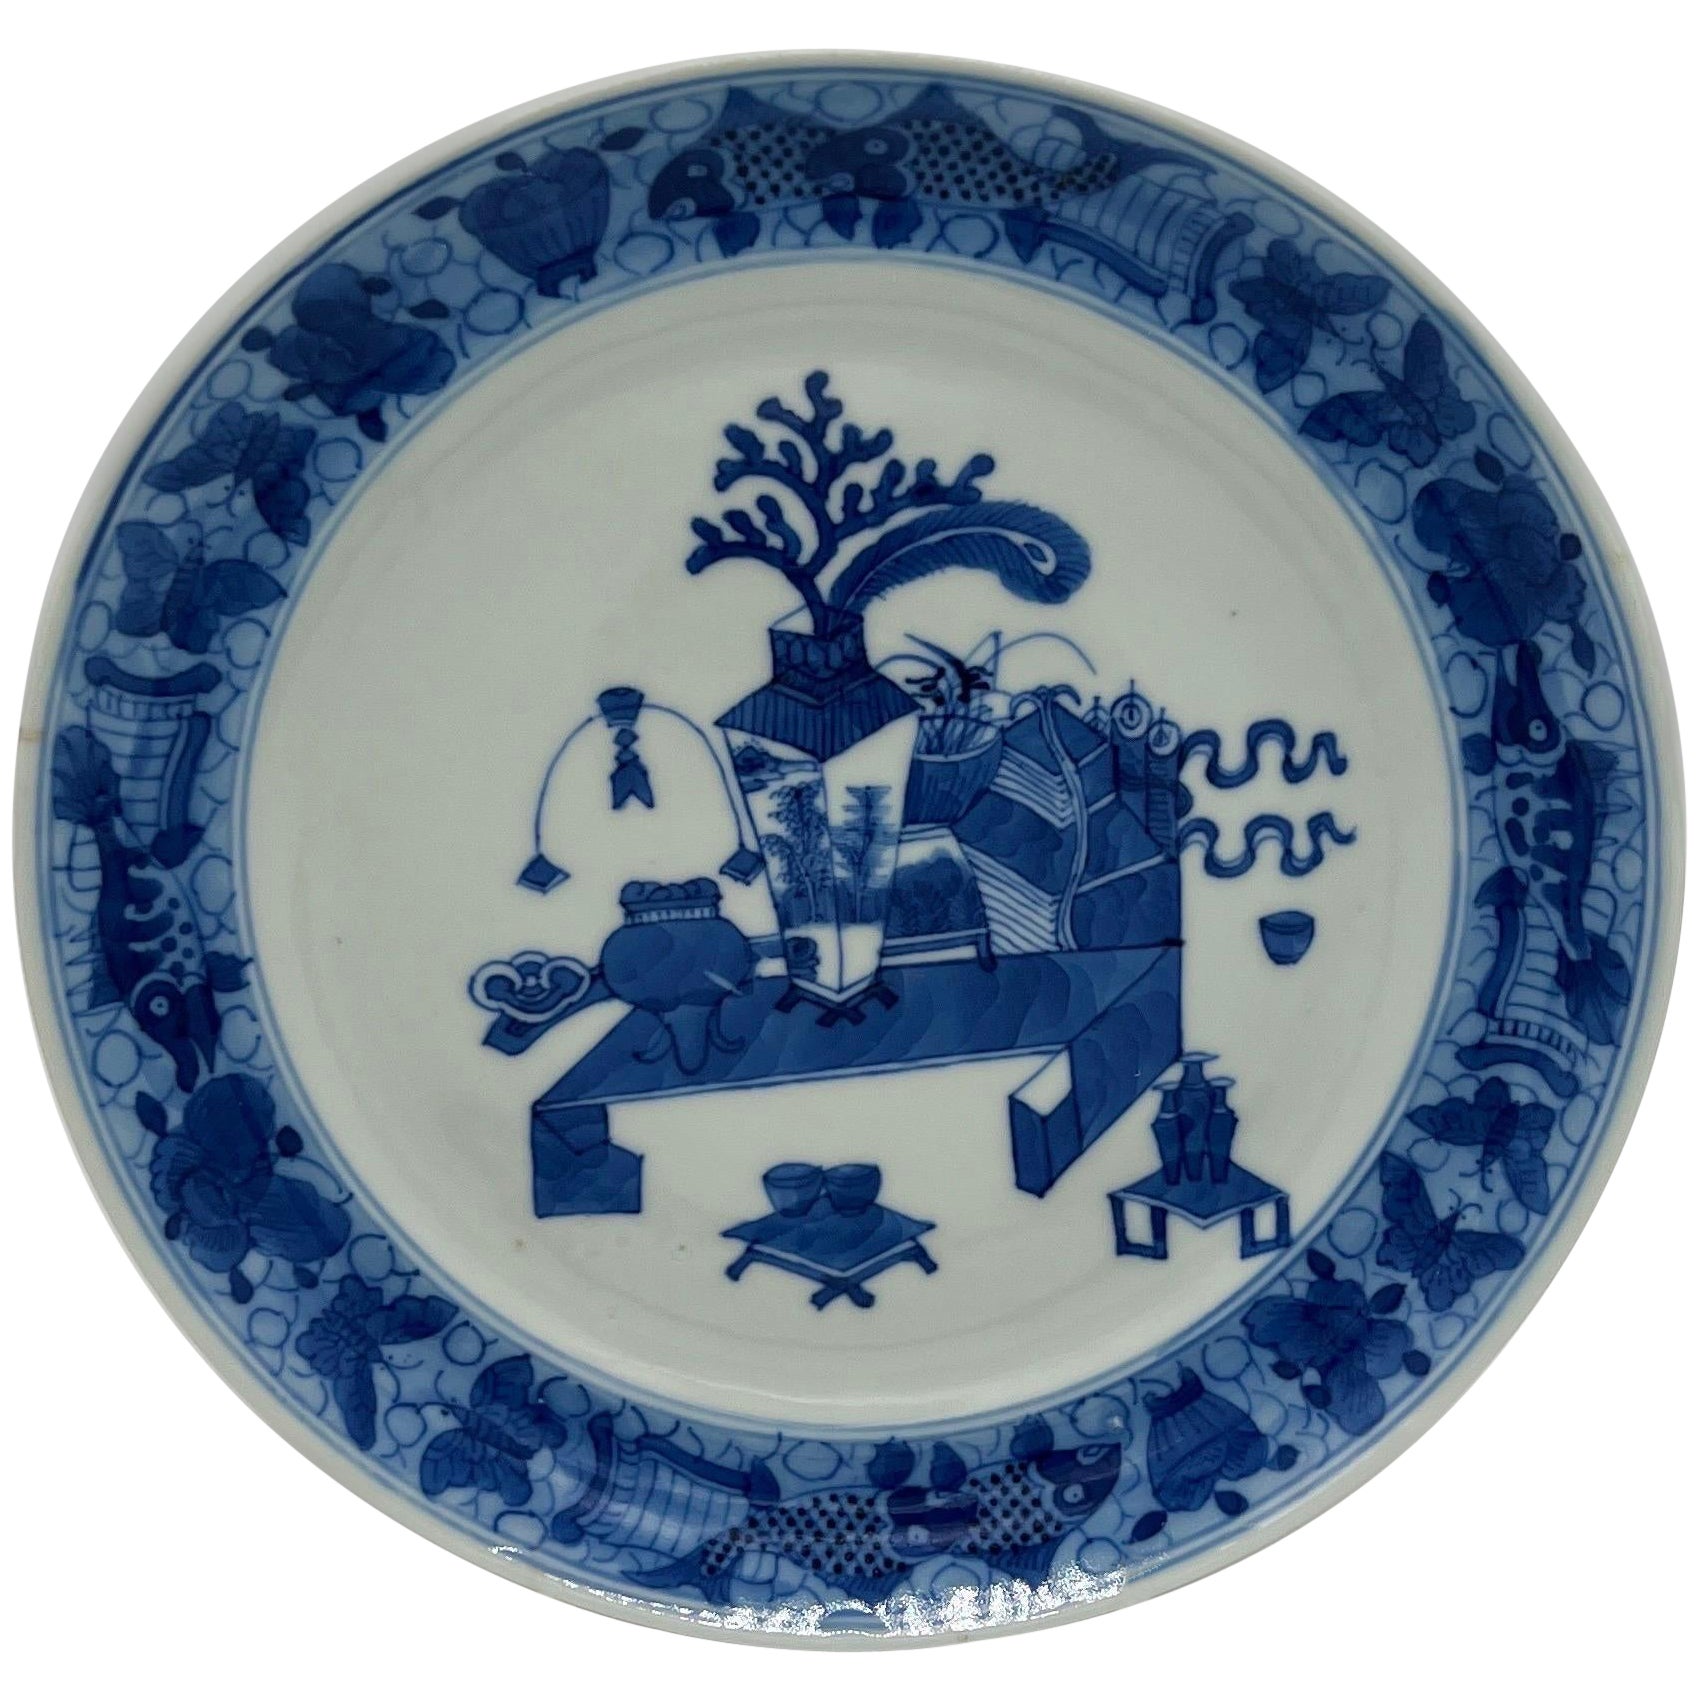 Chinese export blue & white plate, ‘precious objects’, c.1780